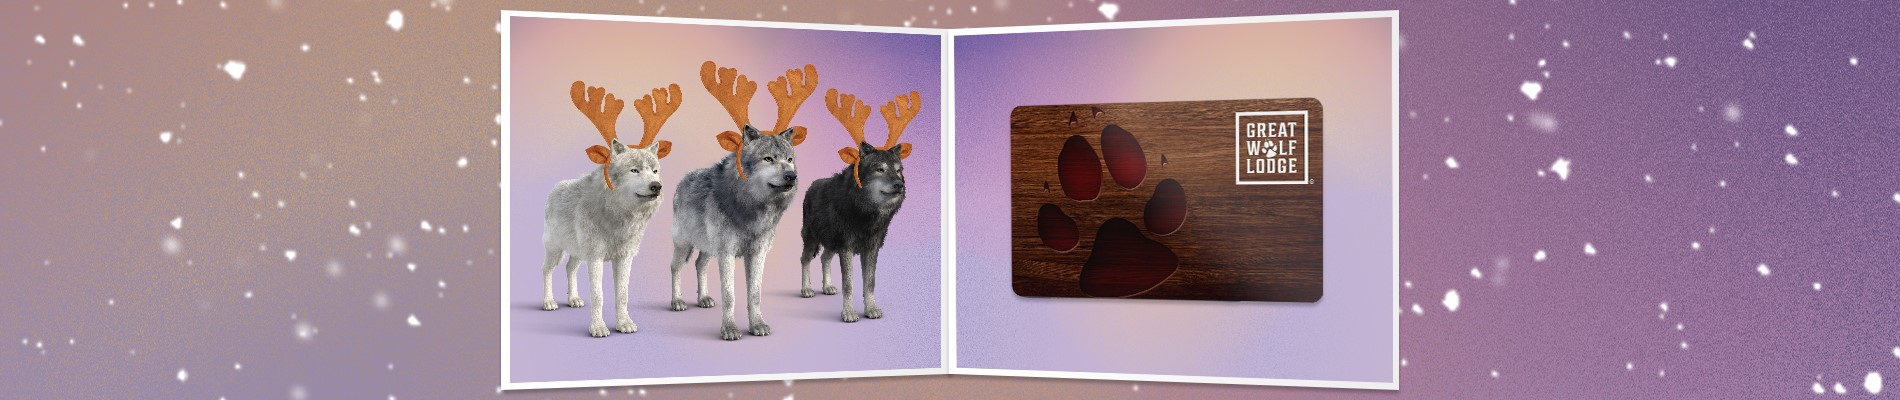 The Great Wolf Lodge Holiday Themed Gift Card Image